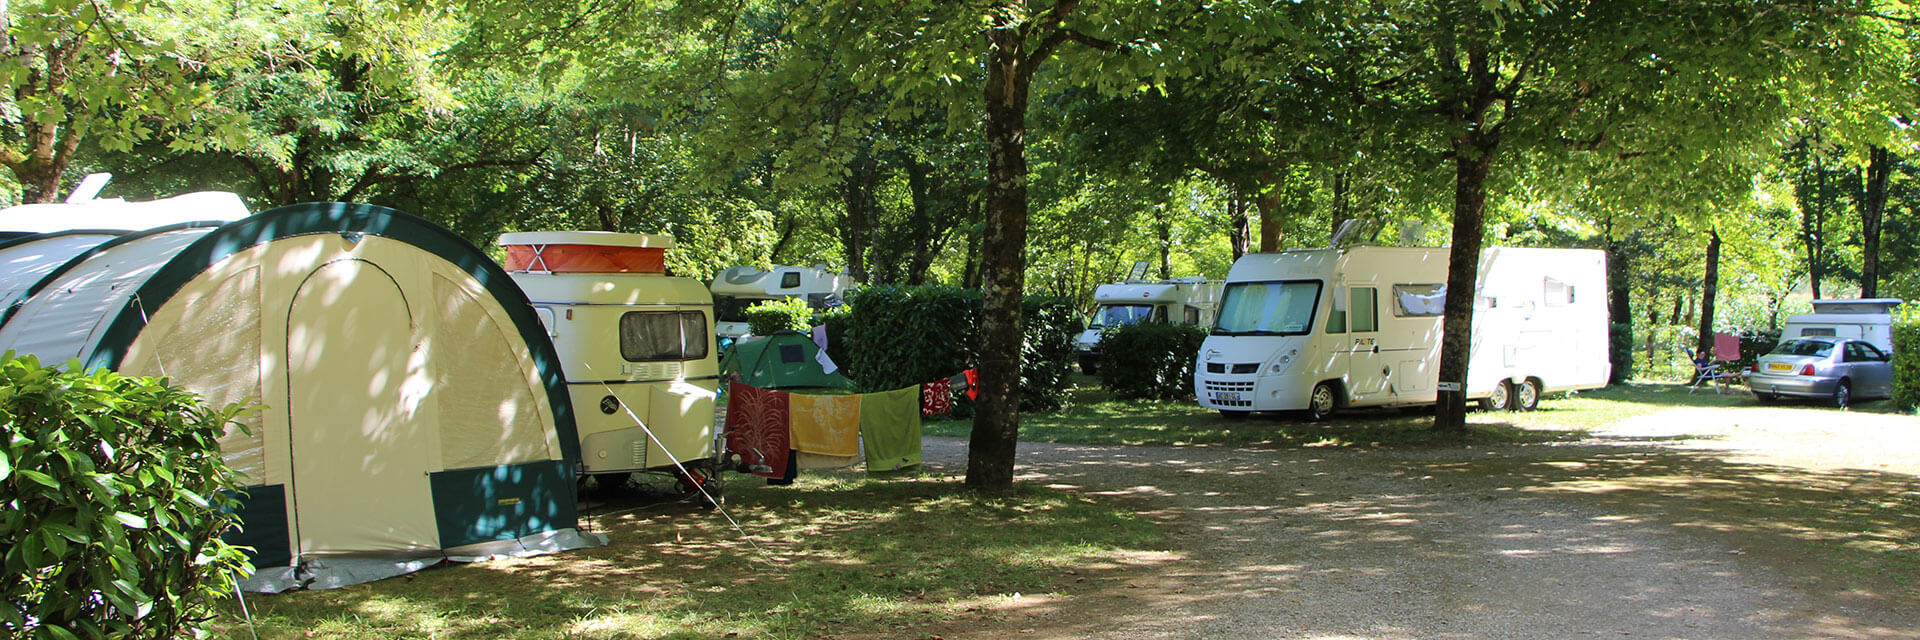 Shaded accommodation for camper vans in the Lot